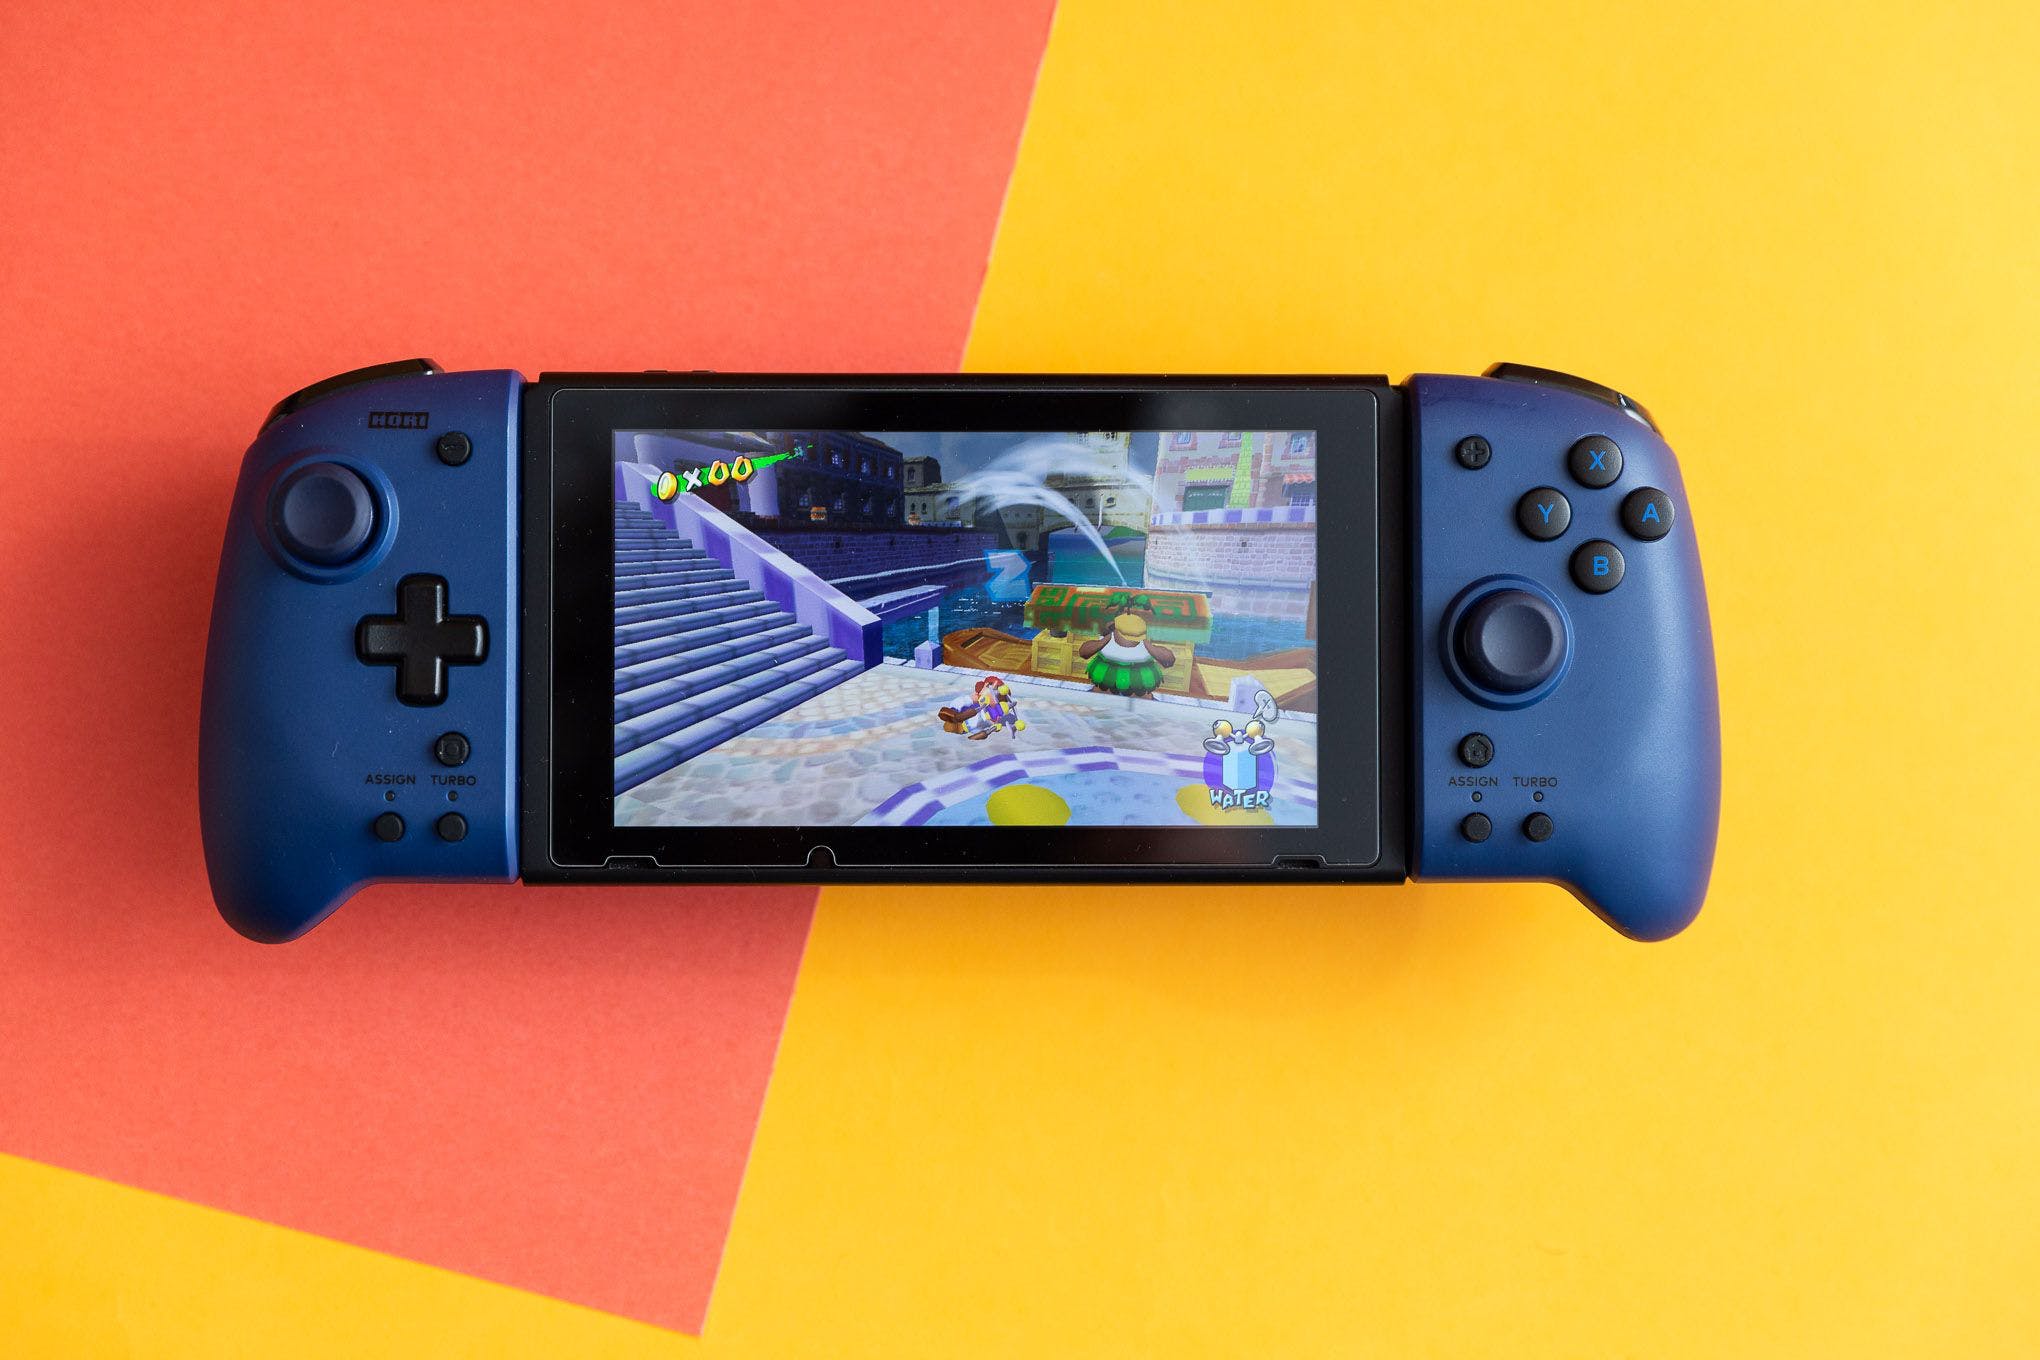 Hori’s Split Pad Pro are connected to a Nintendo Switch that is displaying Super Mario Sunshine.